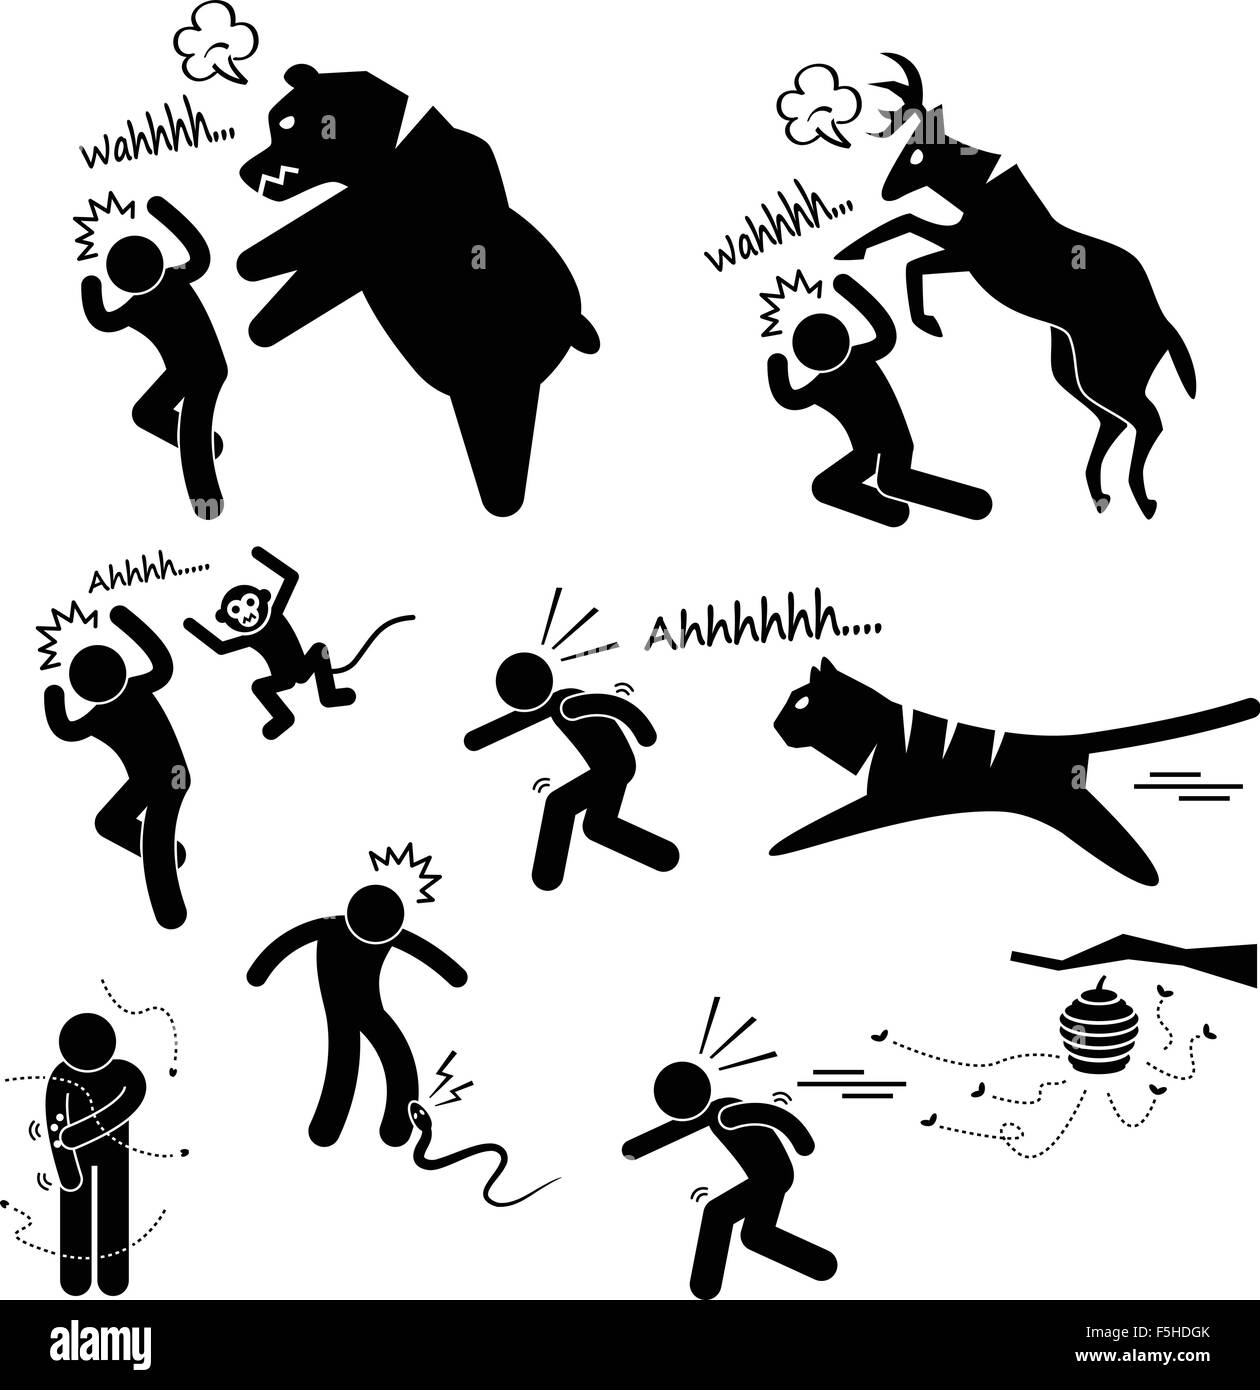 Wild Animal Attacking Hurting Human Stick Figure Pictogram Icon Stock Vector